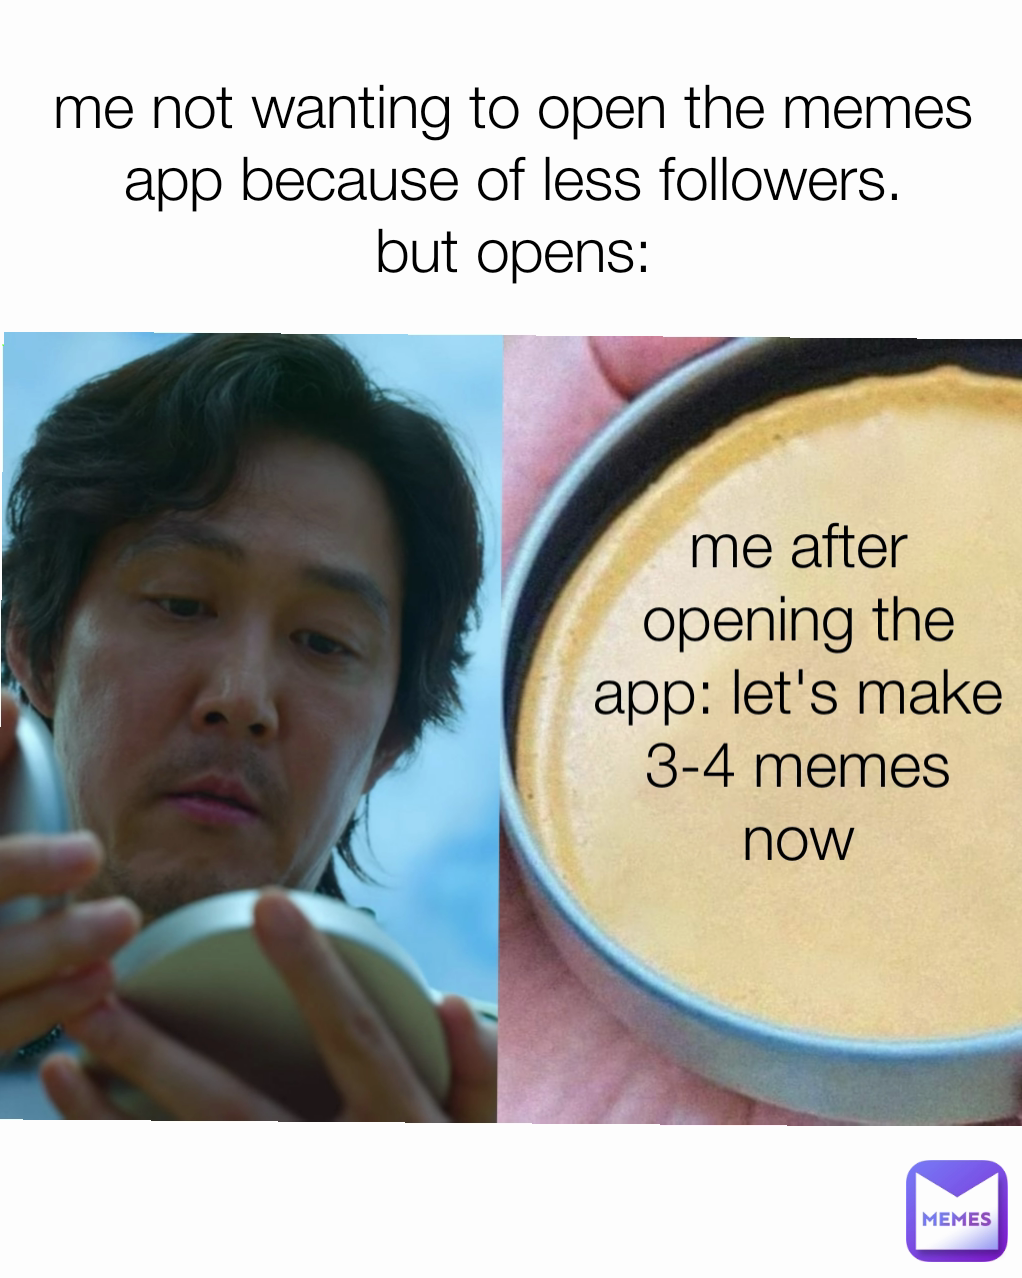 me not wanting to open the memes app because of less followers.
but opens: me after opening the app: let's make 3-4 memes now